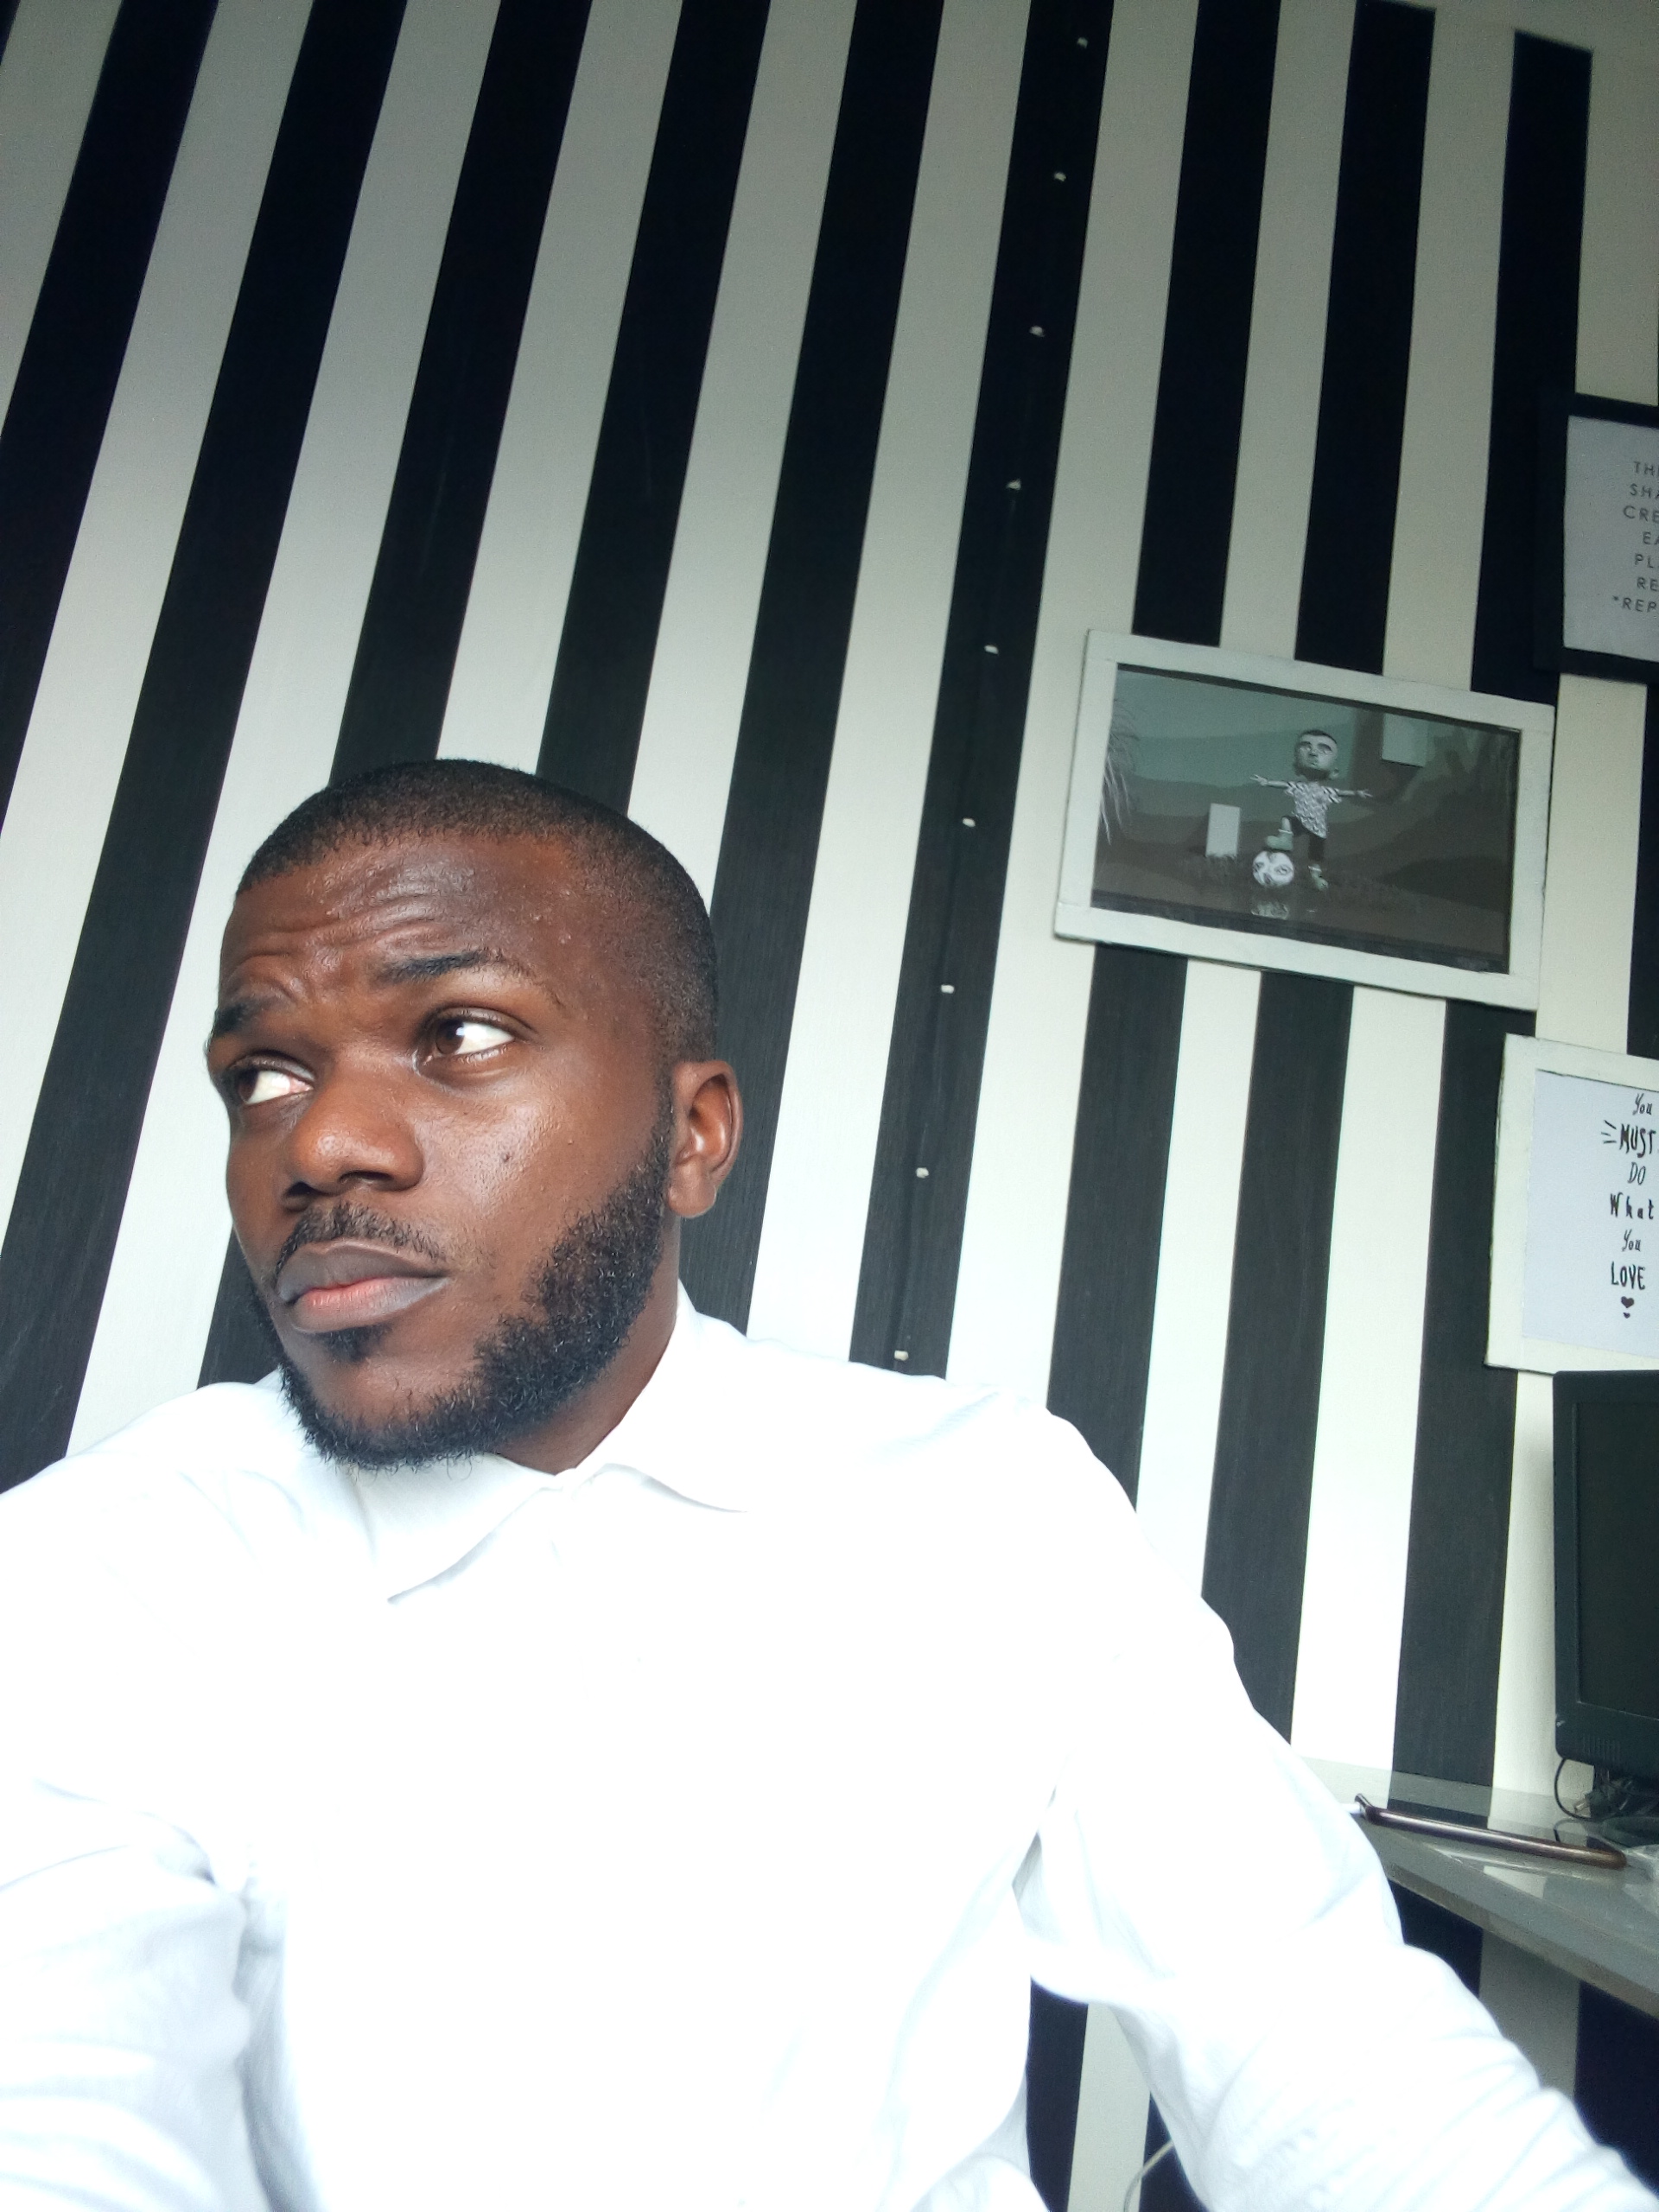 IMG 20190721 130303 - Indigenous Game Developer "Edu Shola" and How he Builds Nigerian Games